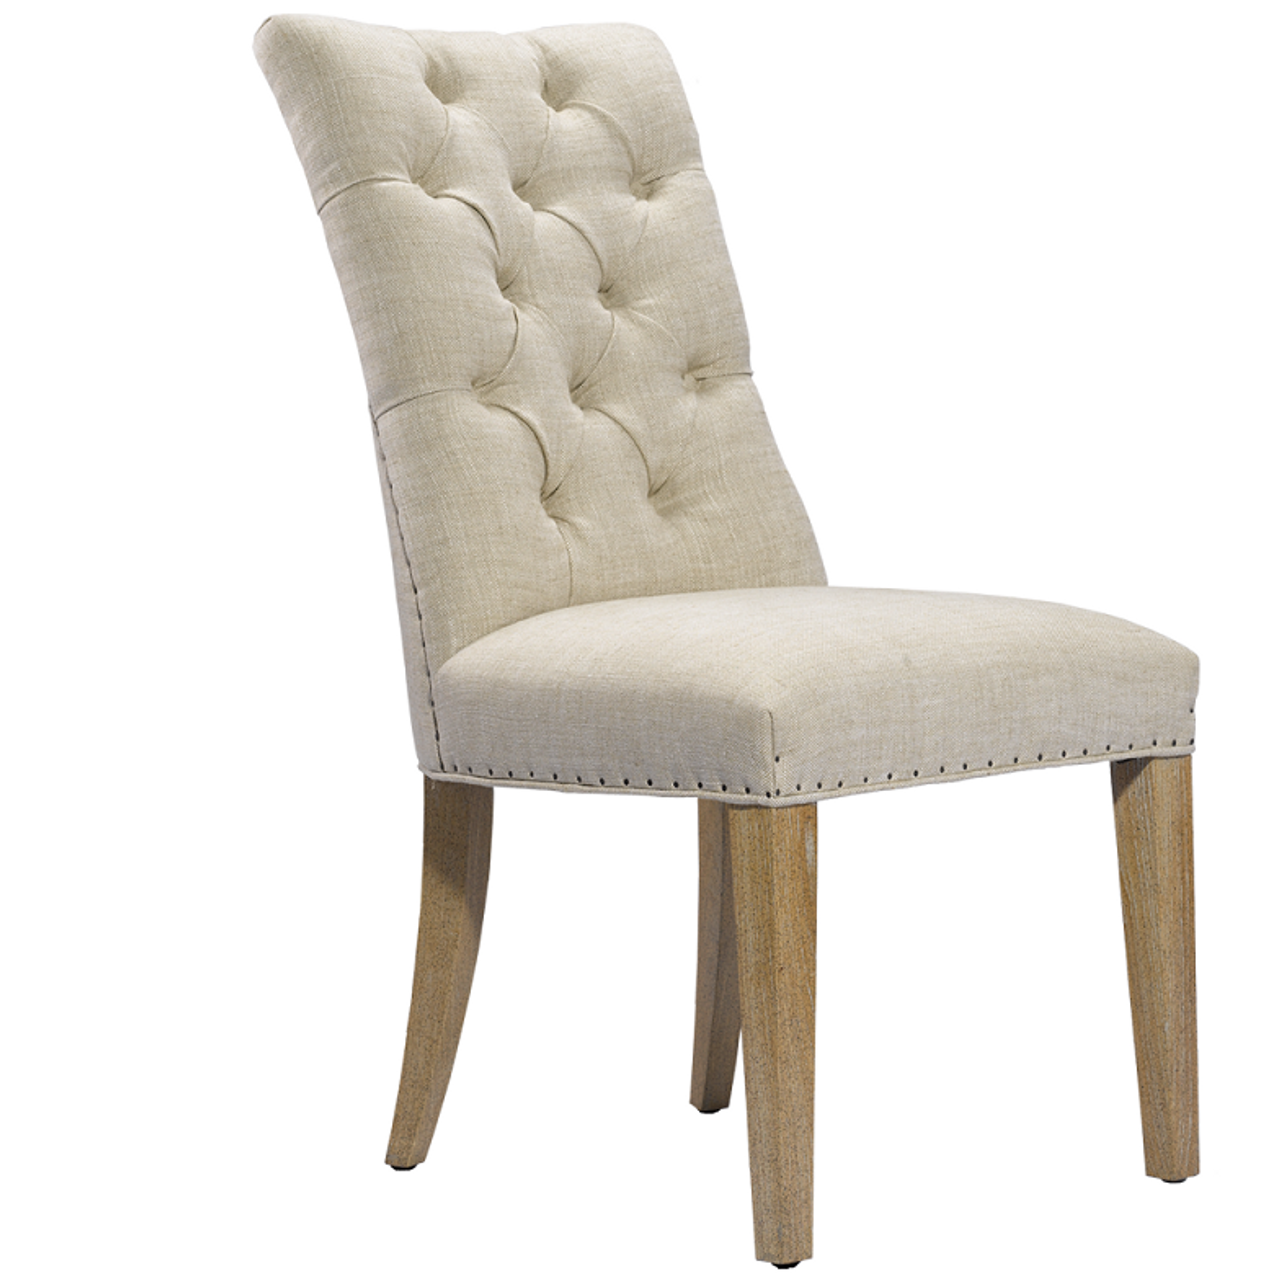 Luxe Linen Upholstered Dining Side Chair | Zin Home